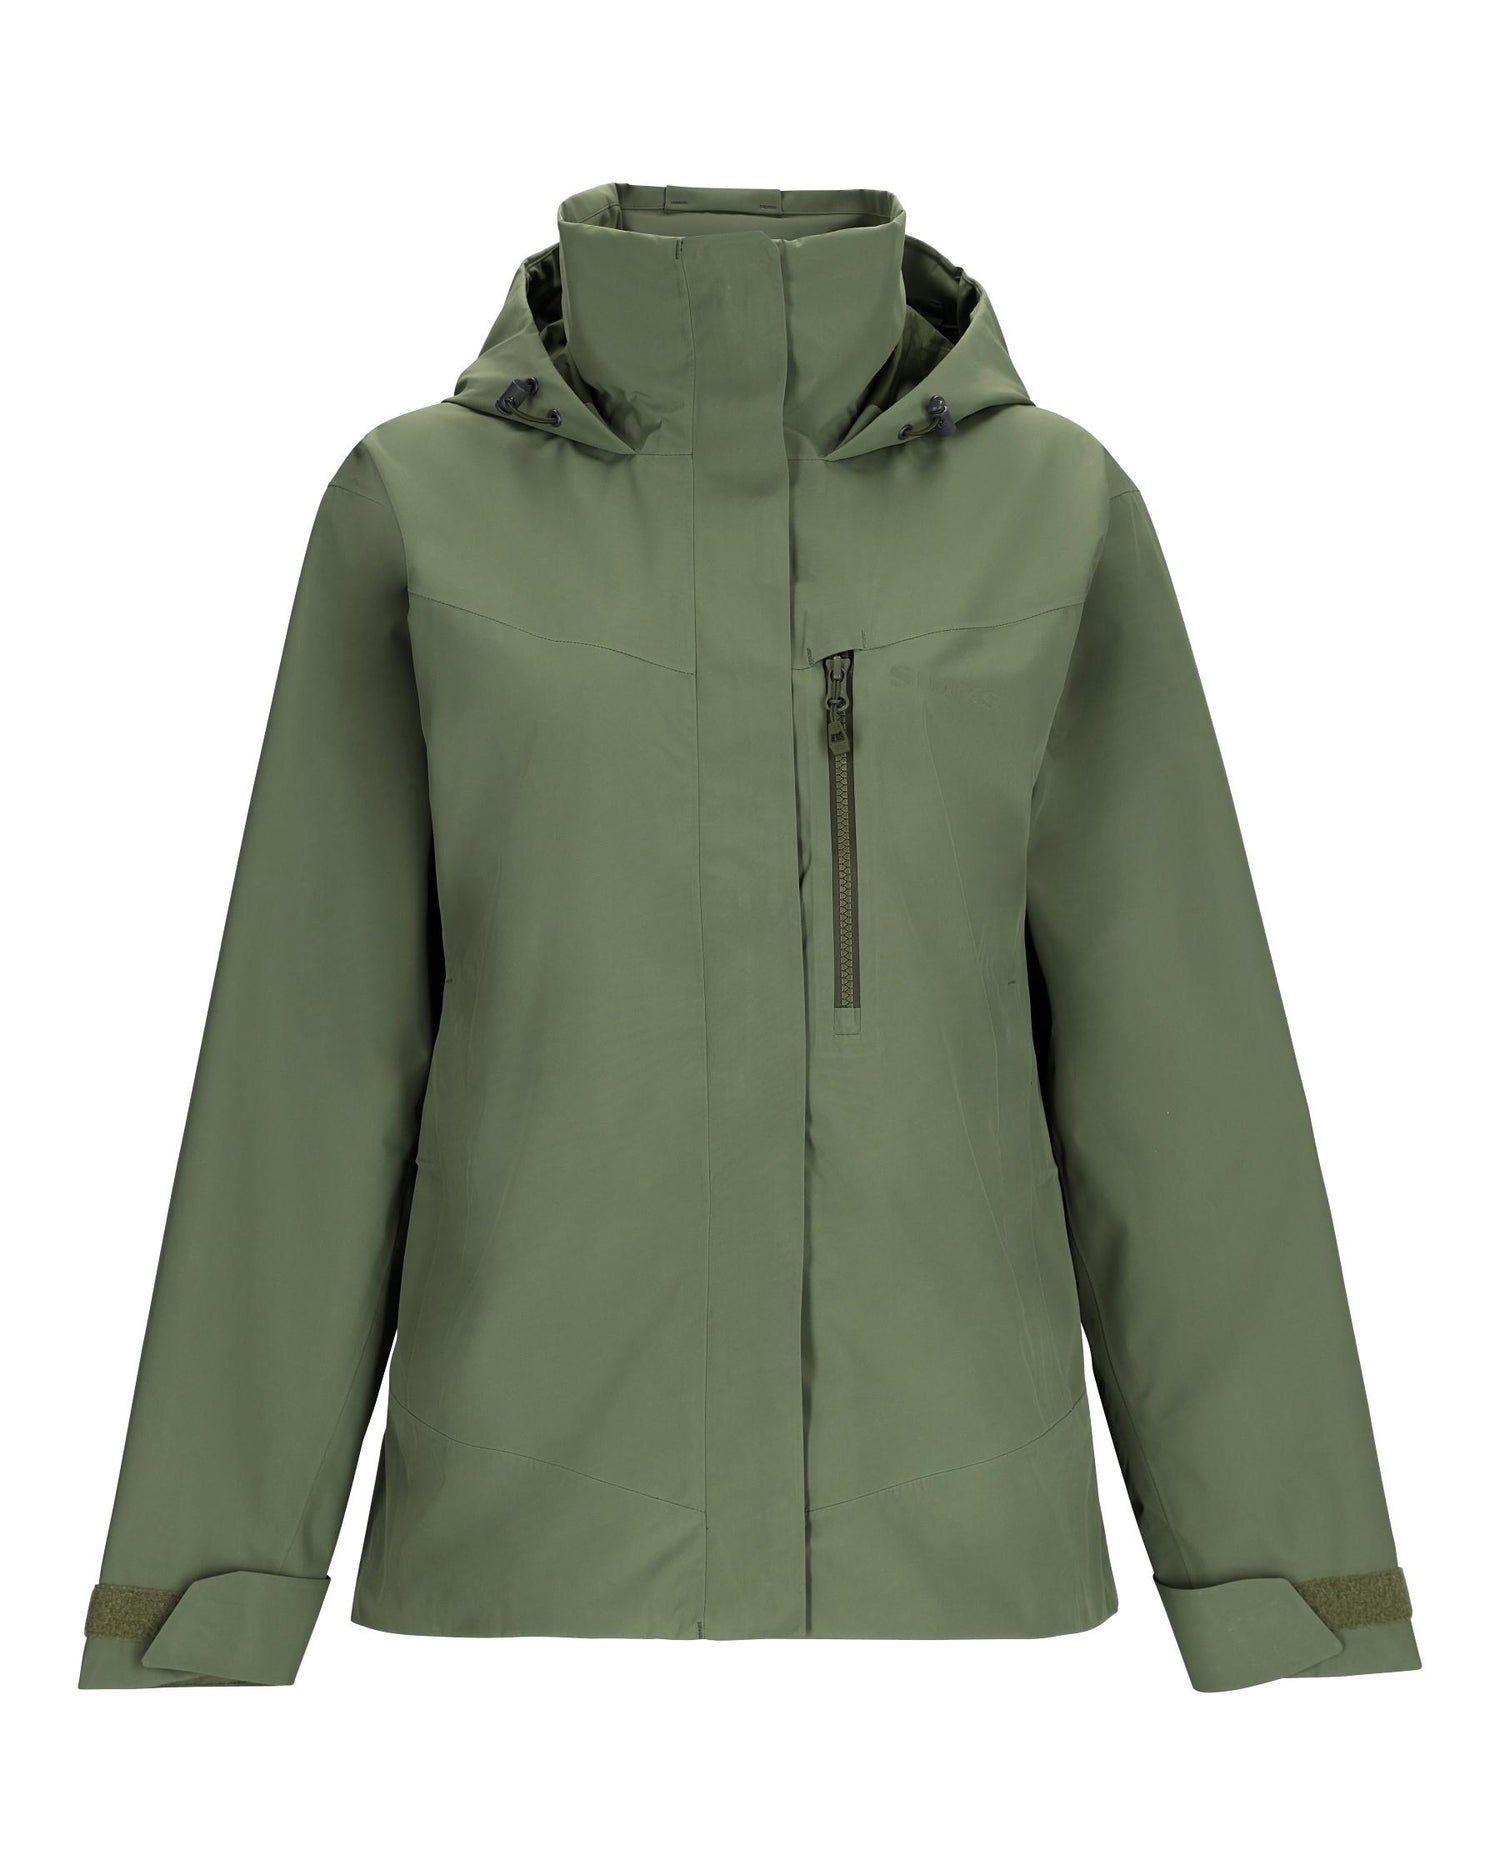 Simms Fishing Rain Gear Is Up To 40% Off Right Now